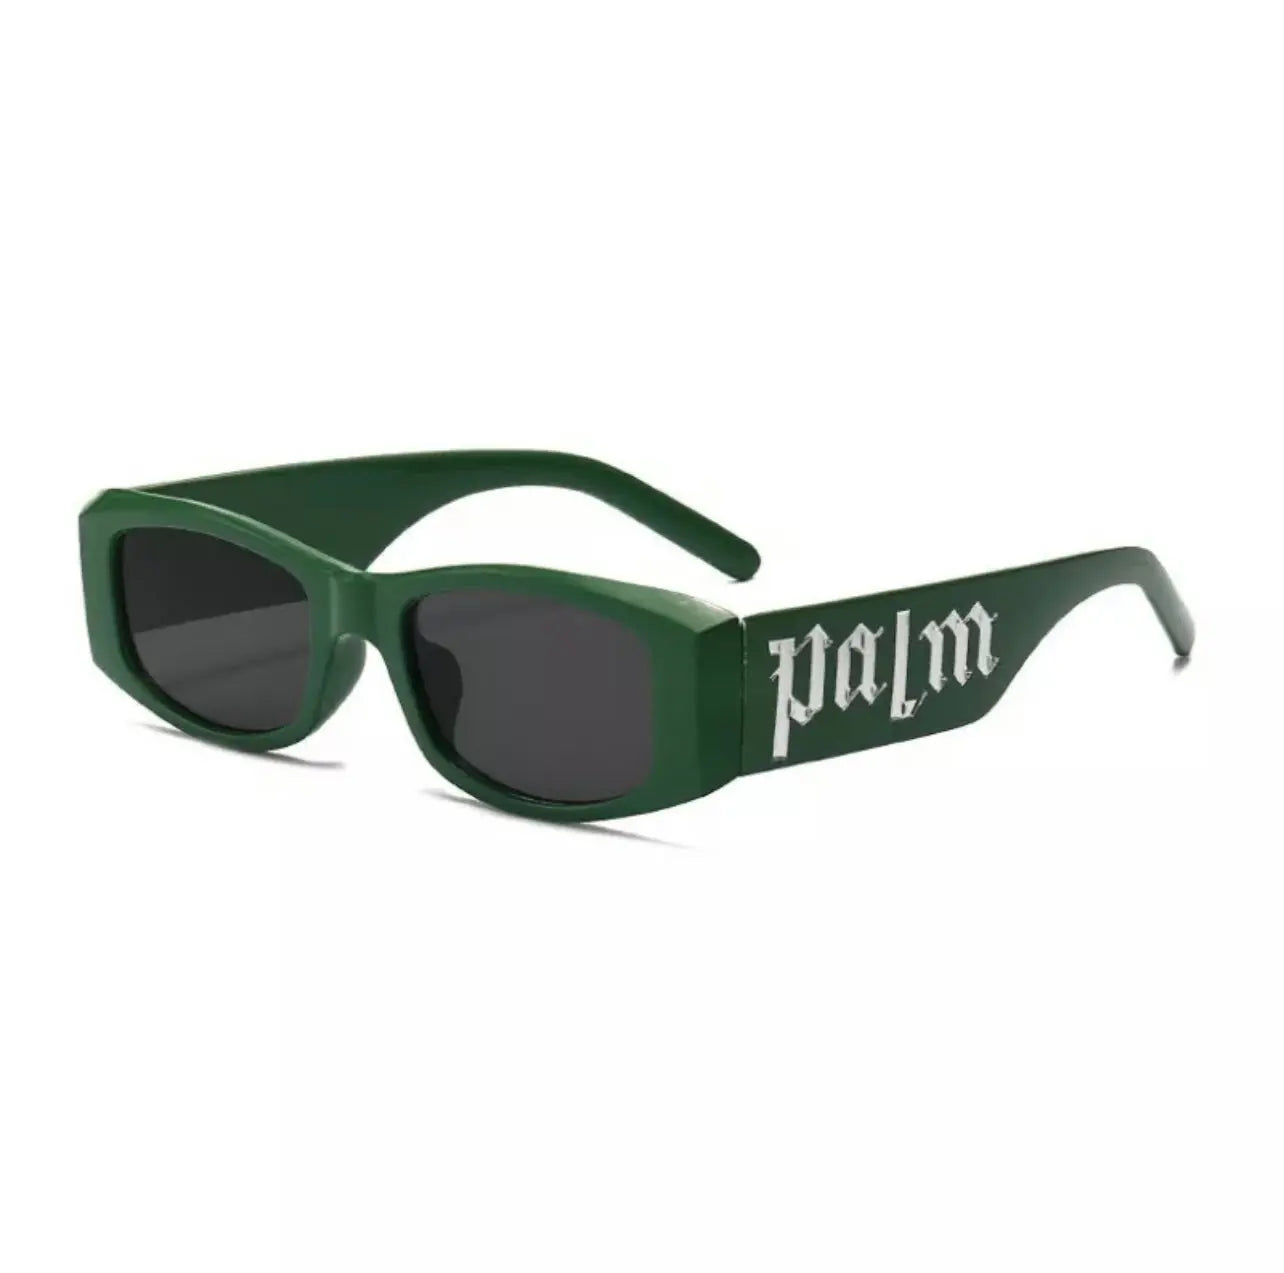 a pair of green palm angels sunglasses with the word'palm'on them.